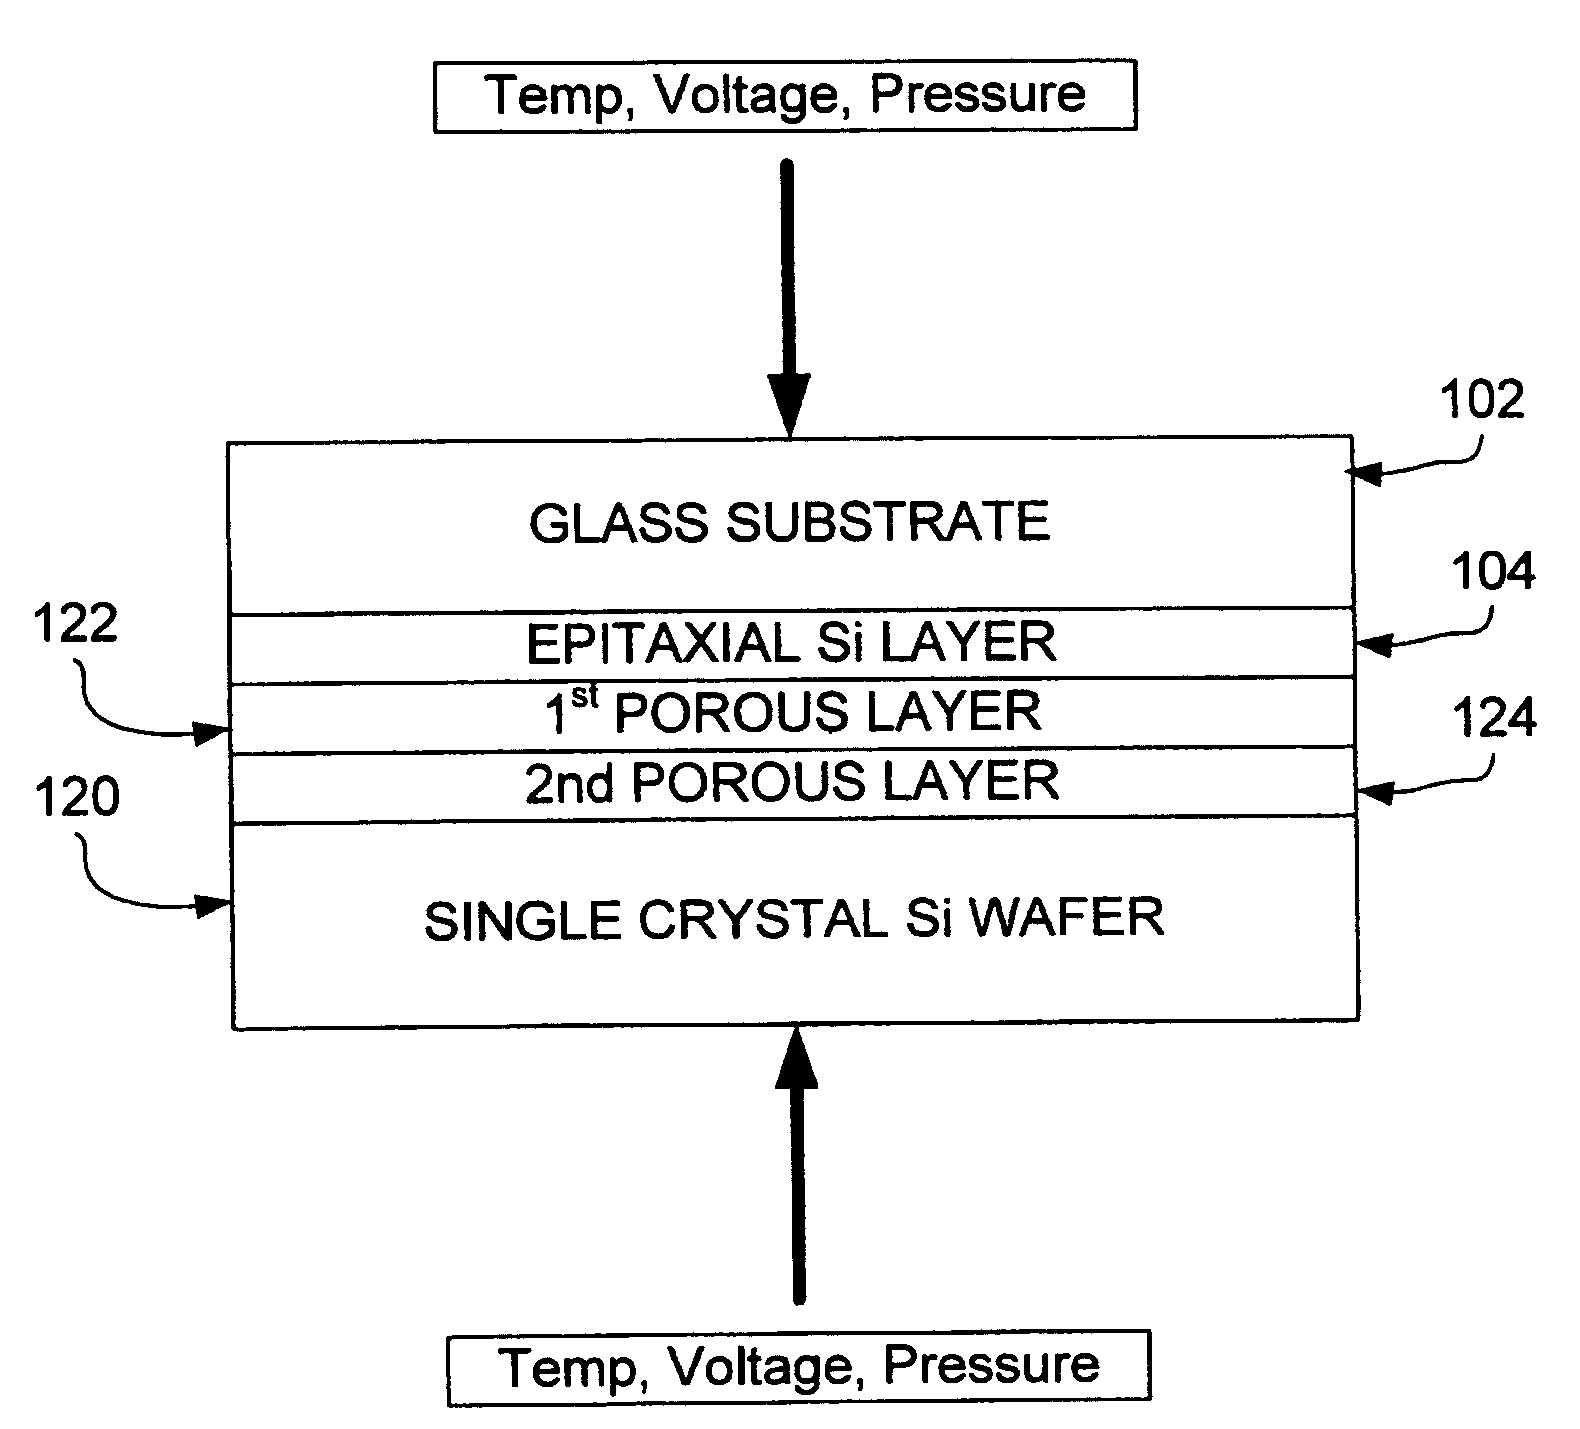 Glass-based semiconductor on insulator structures and methods of making same